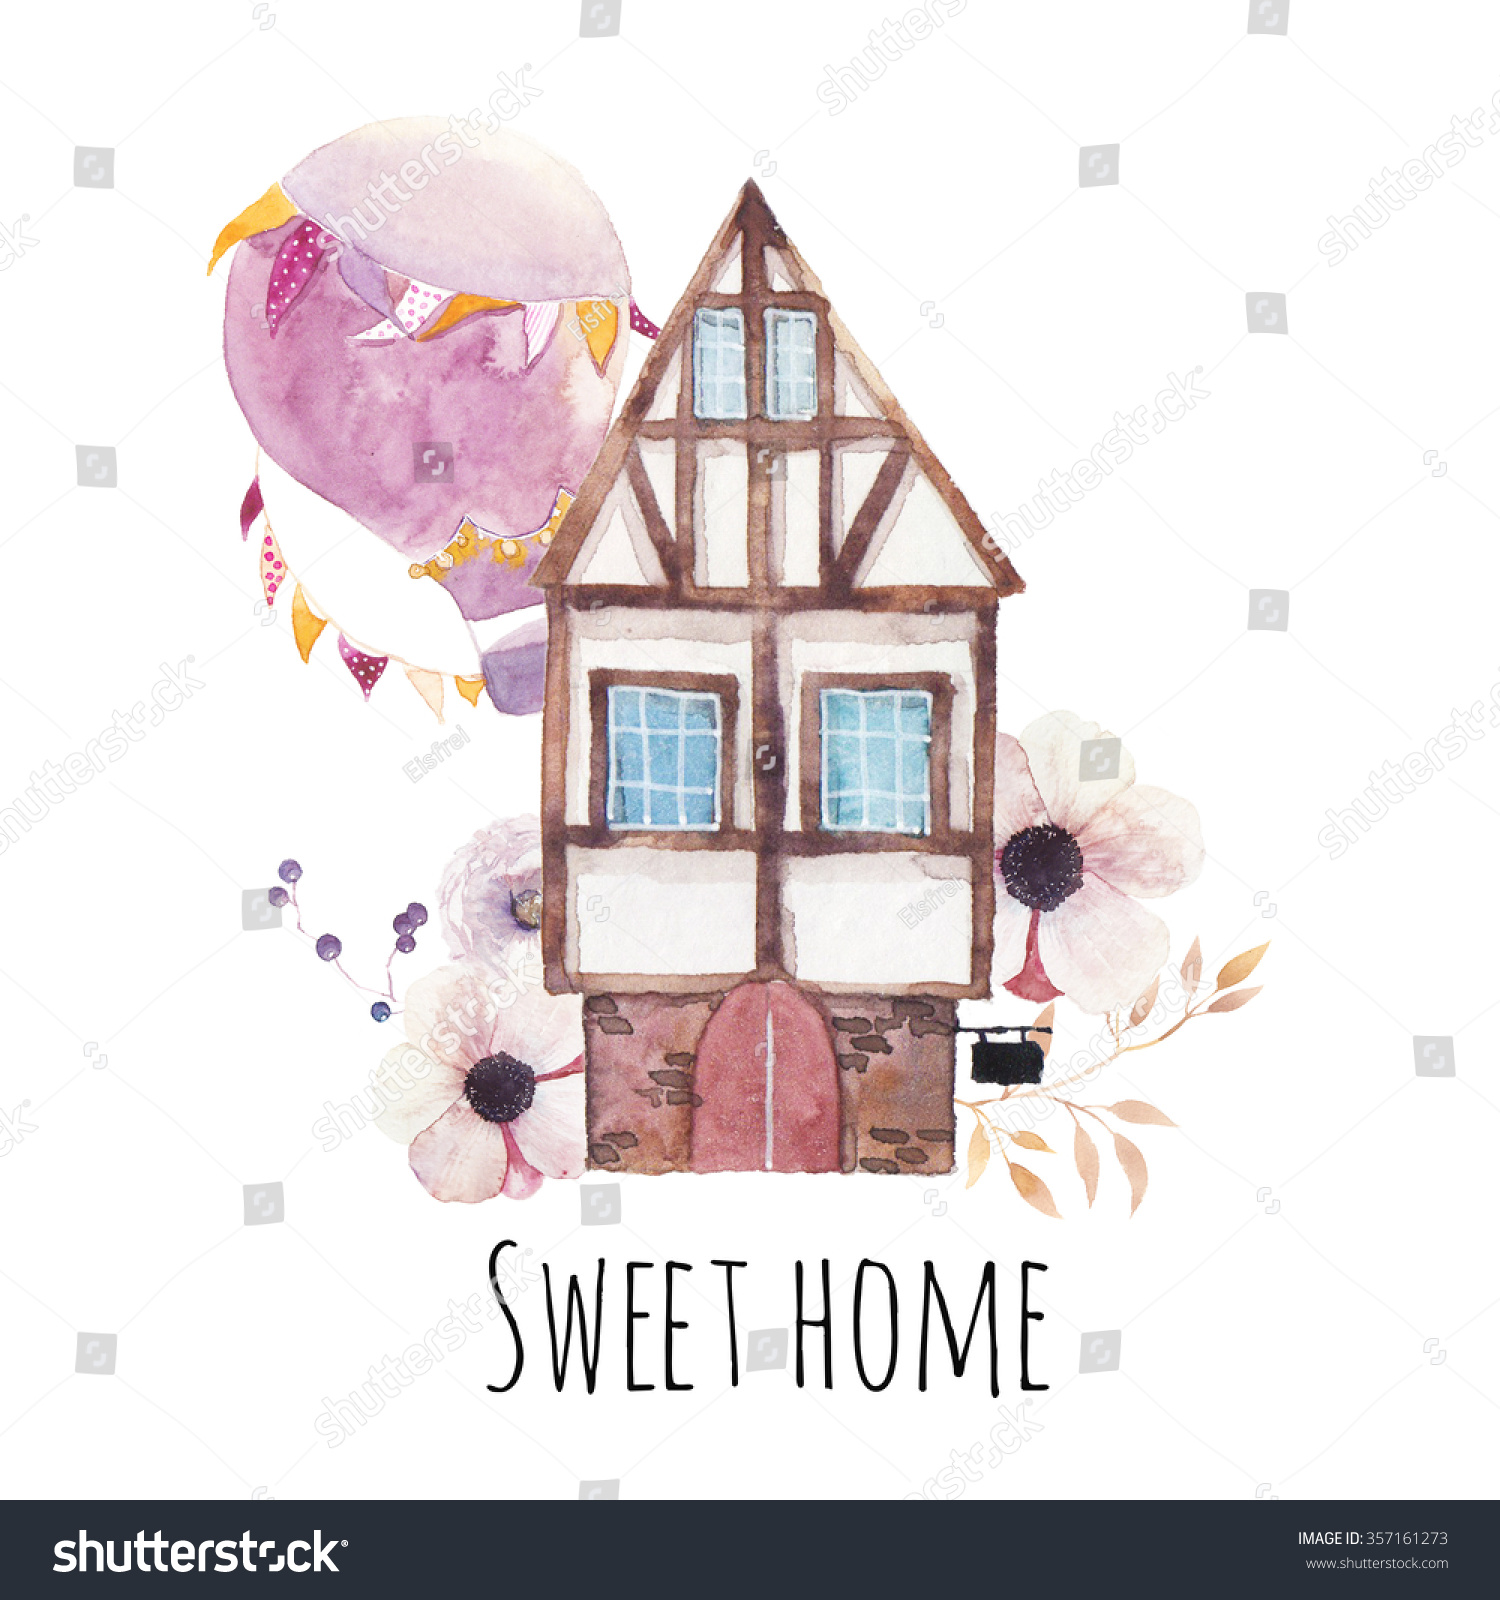 Watercolor Cute House Illustration